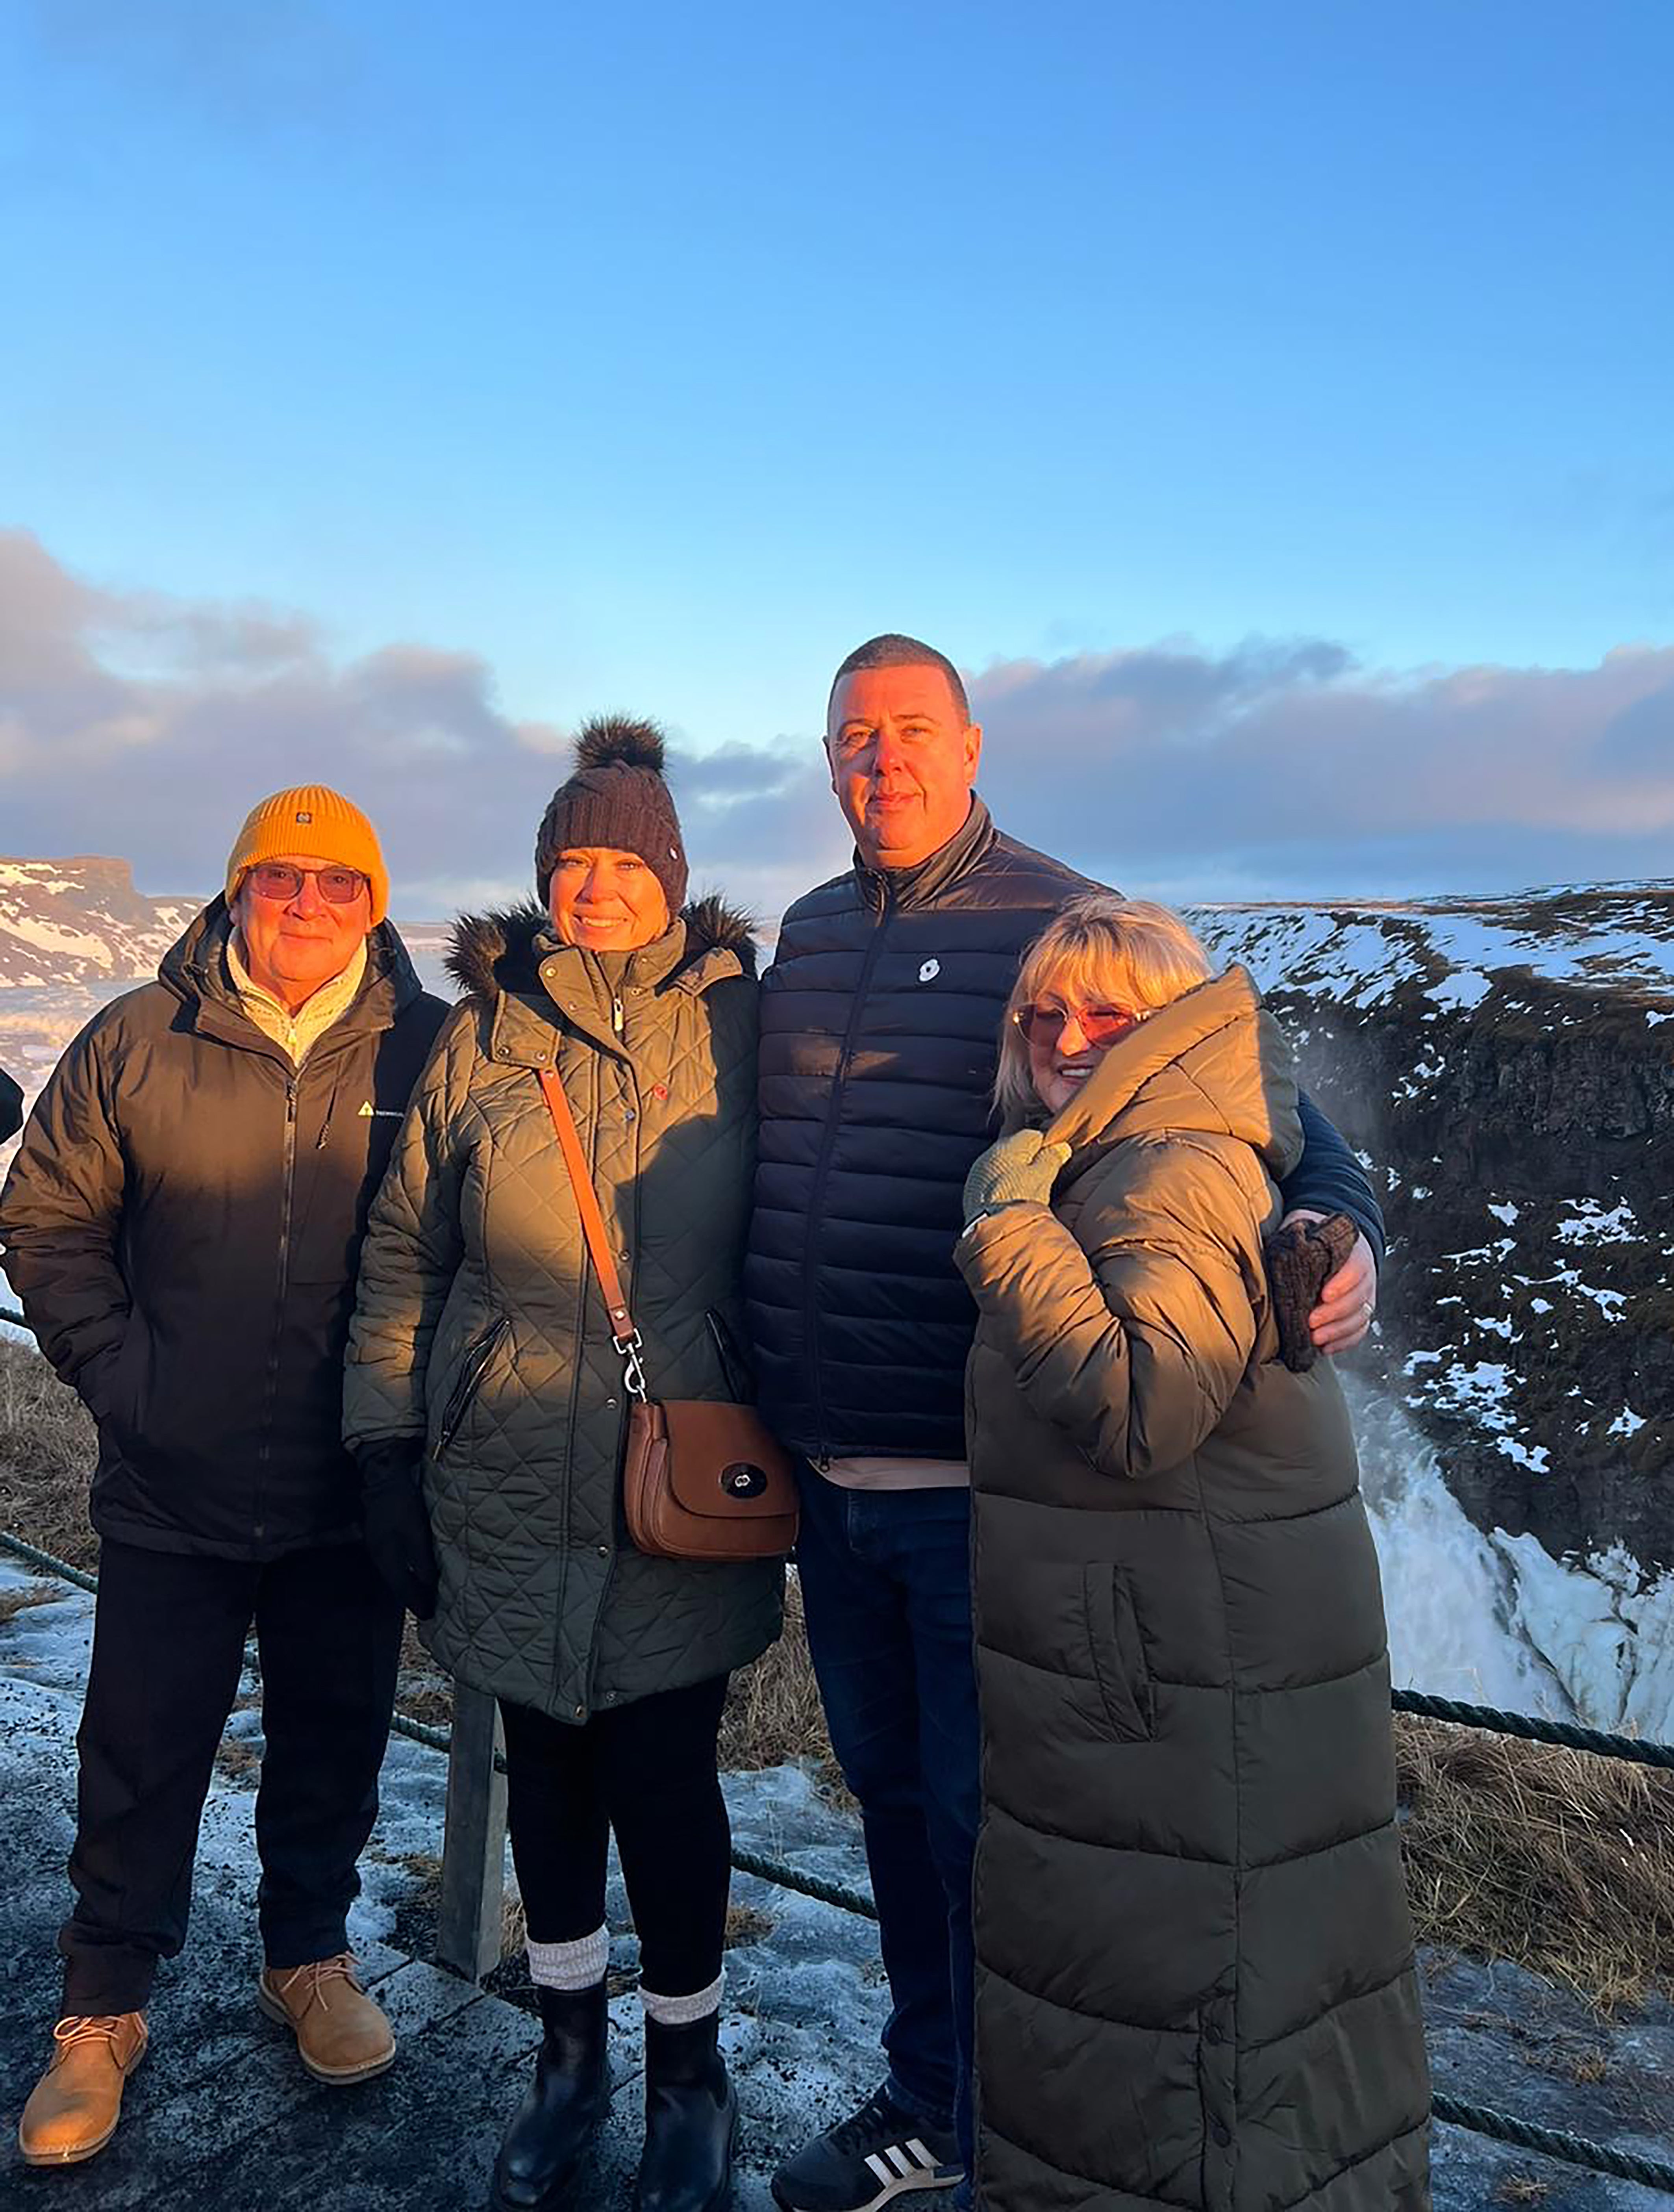 Lorraine Crawford (right) of herself with her husband John Crawford (left) and John’s cousin Michael Daltrey and Faye Daltrey saw the eruption on their way home to the airport